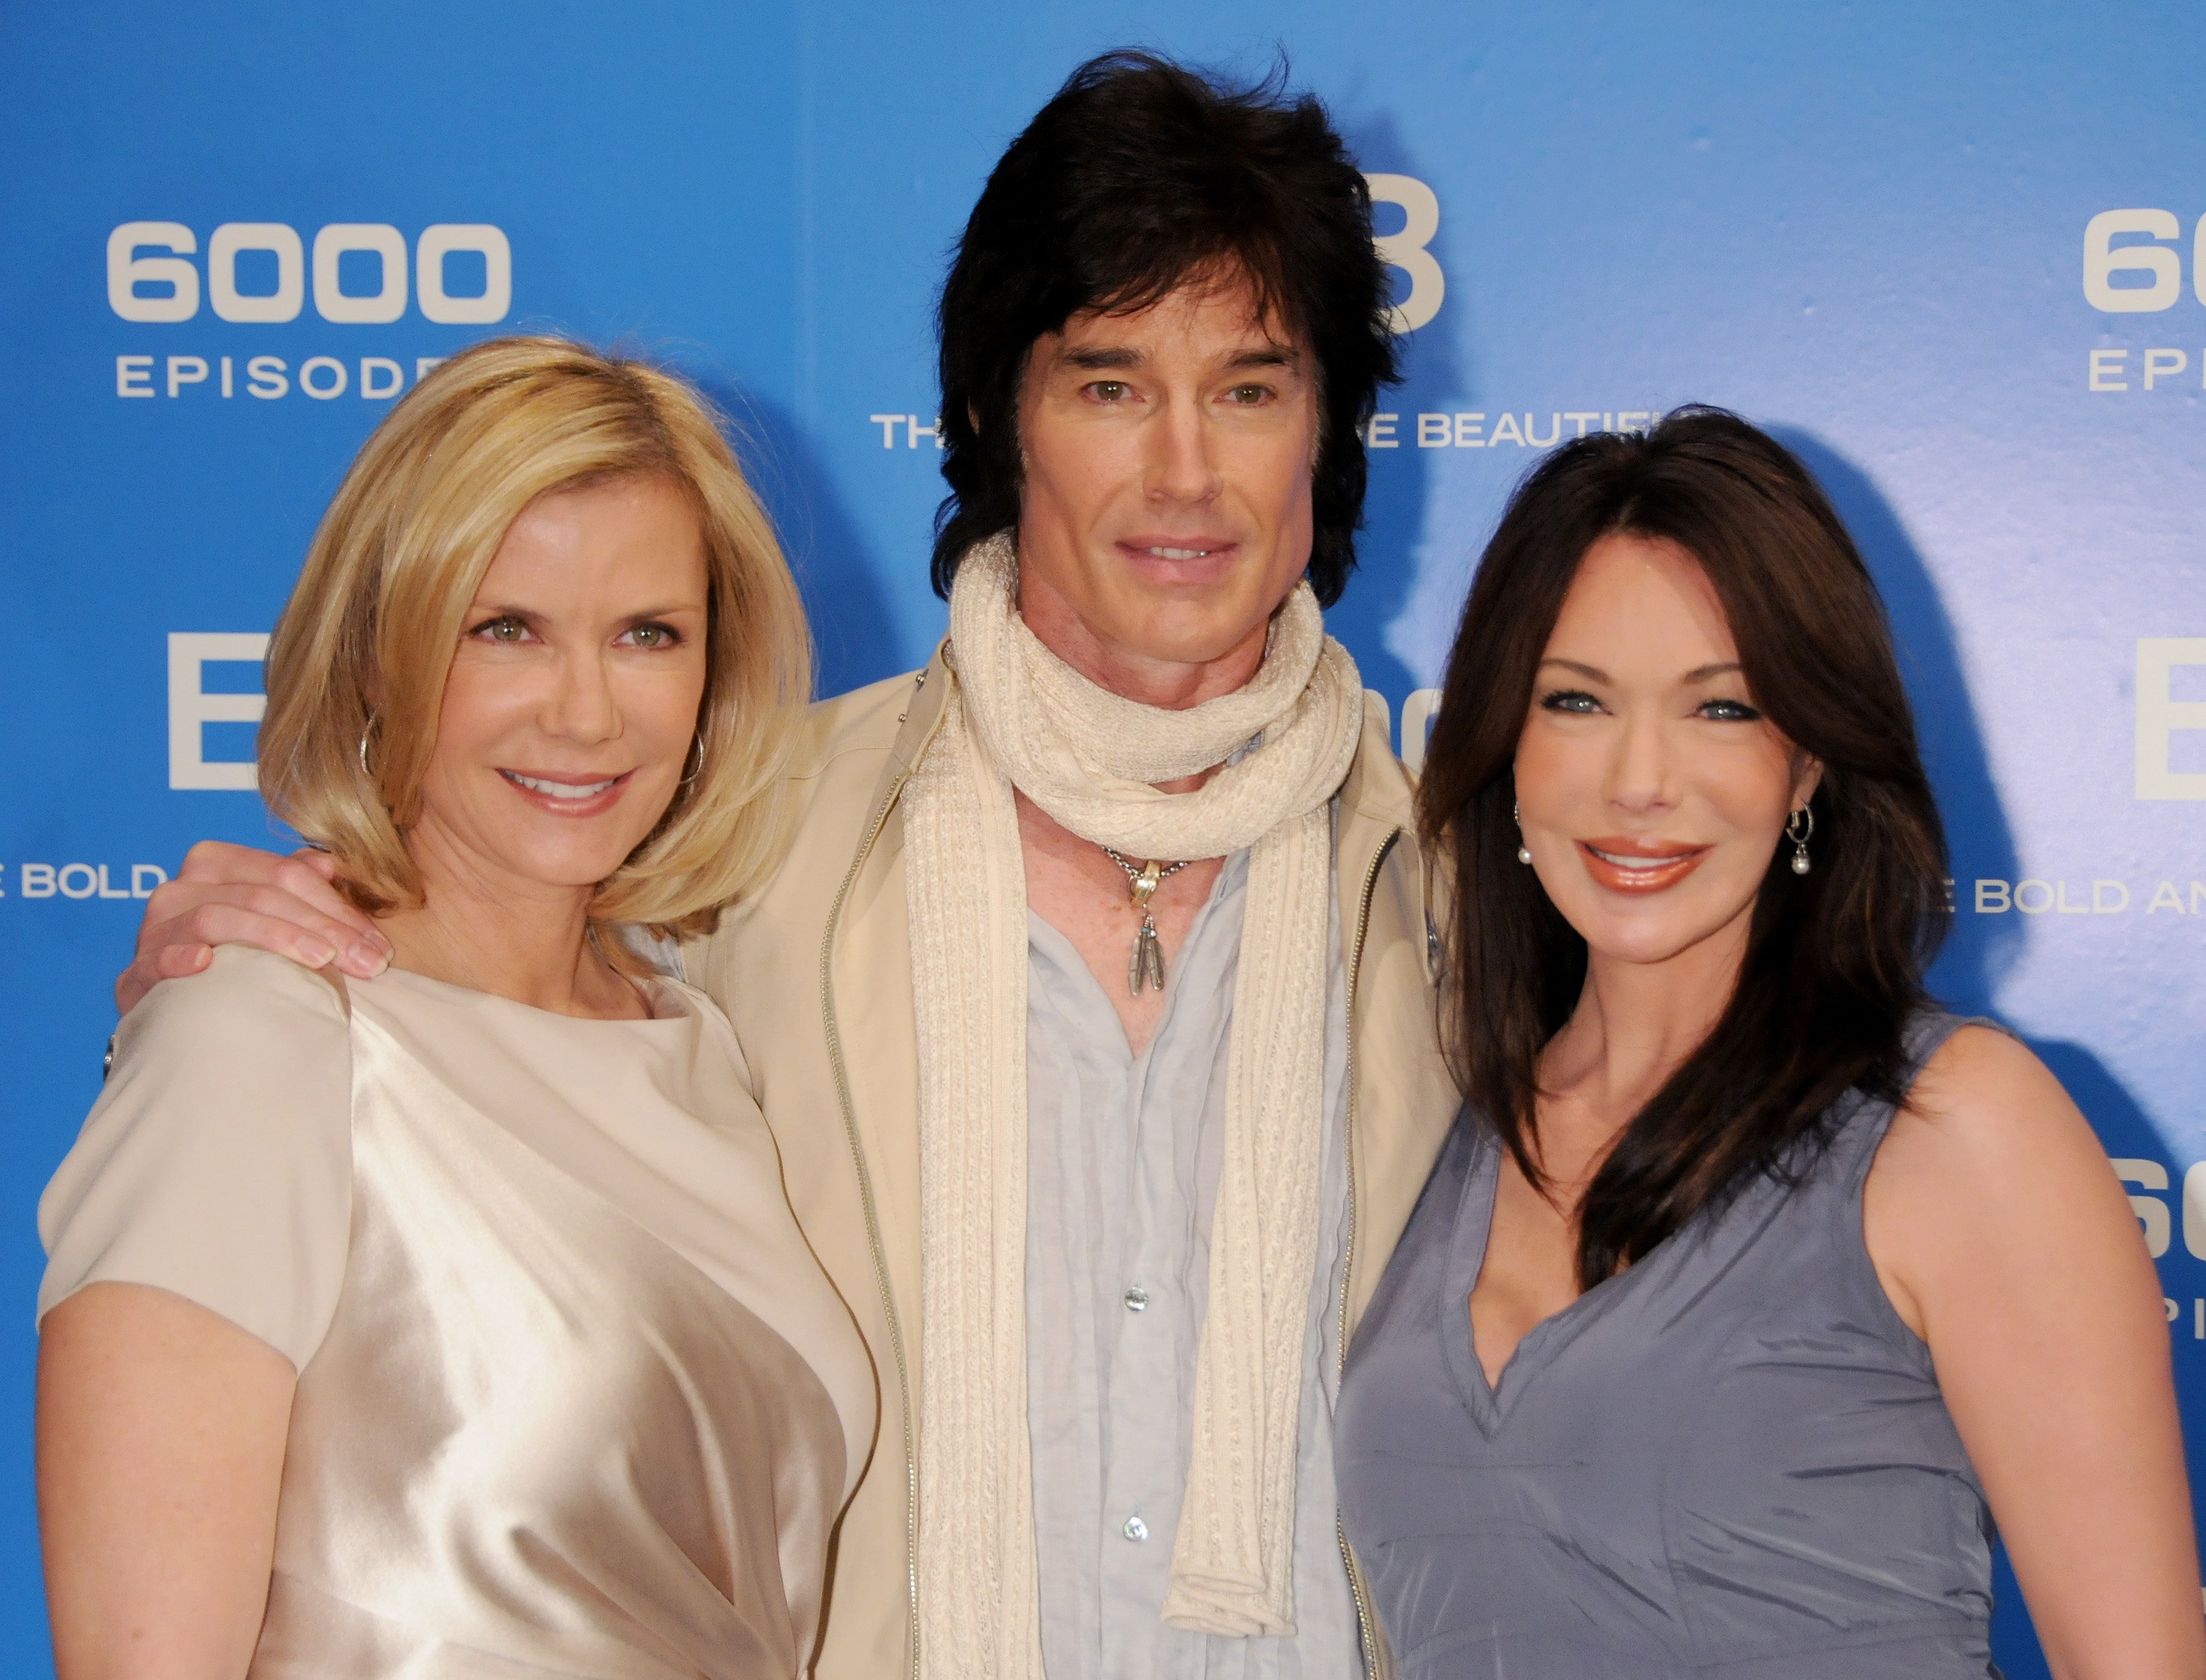 'The Bold and the Beautiful' actors Katherine Kelly Lang, Ronn Moss, and Hunter Tylo posing together on the red carpet.